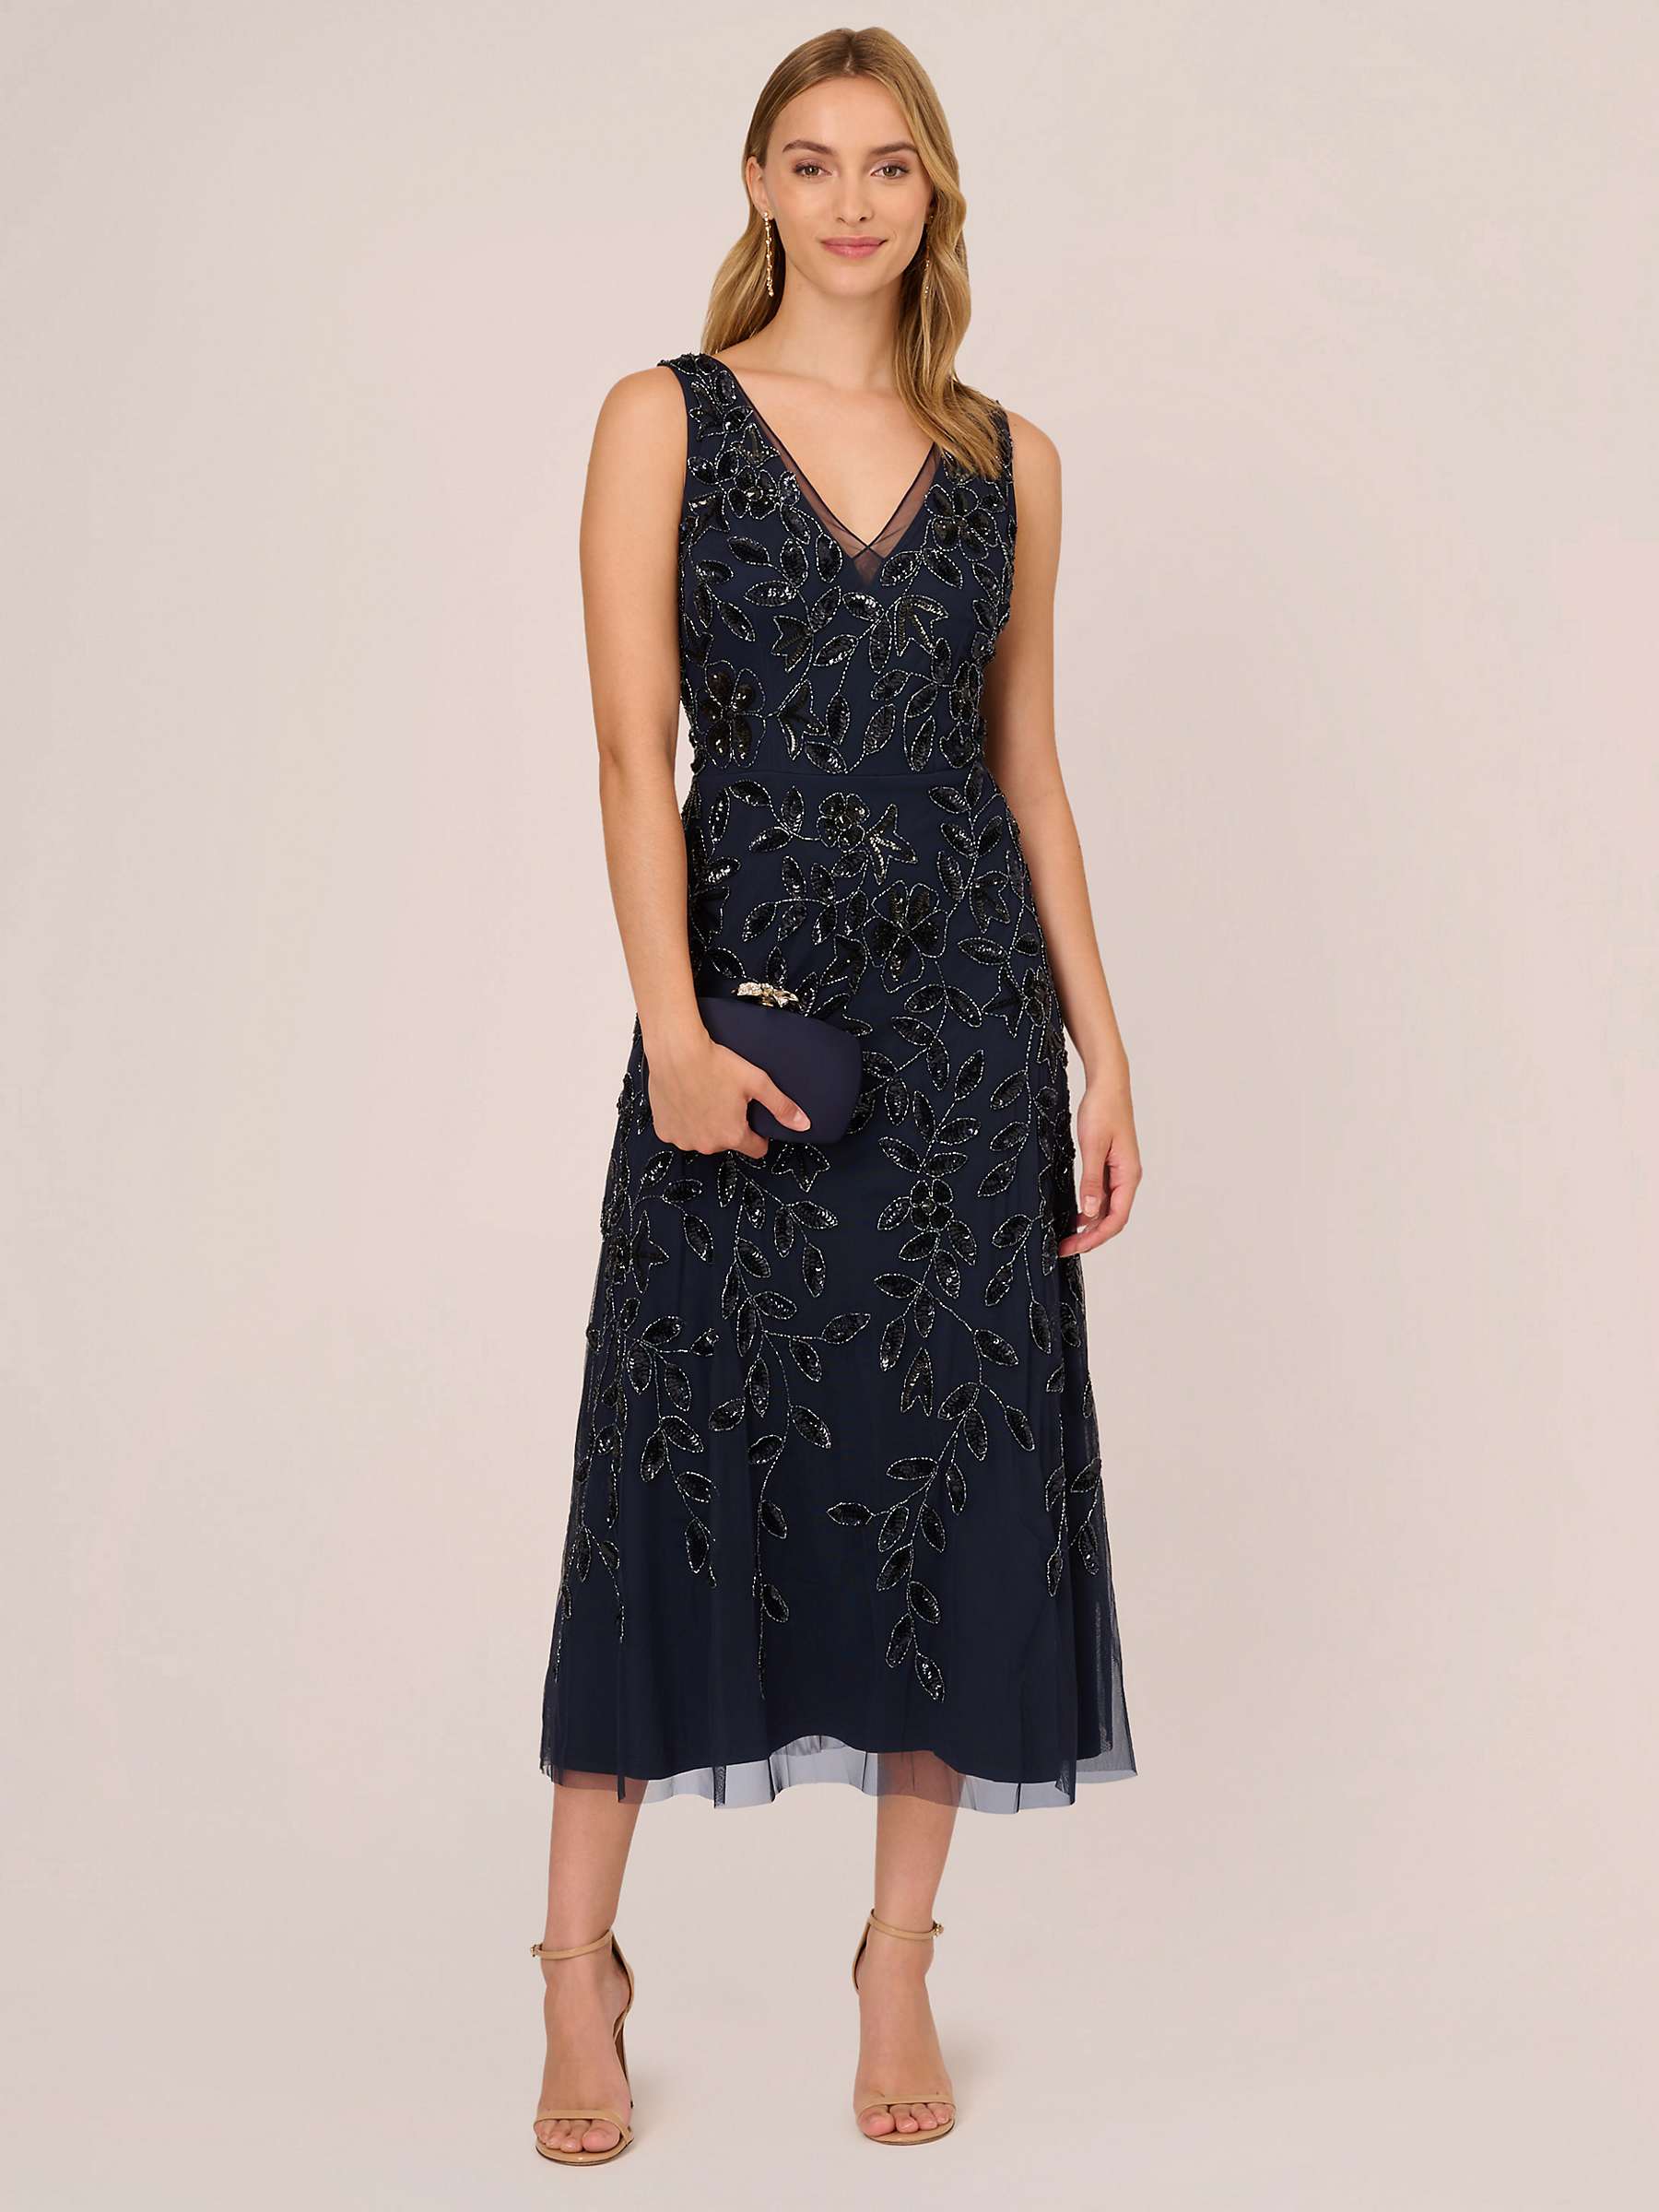 Adrianna Papell Beaded Ankle Length Gown, Navy at John Lewis & Partners